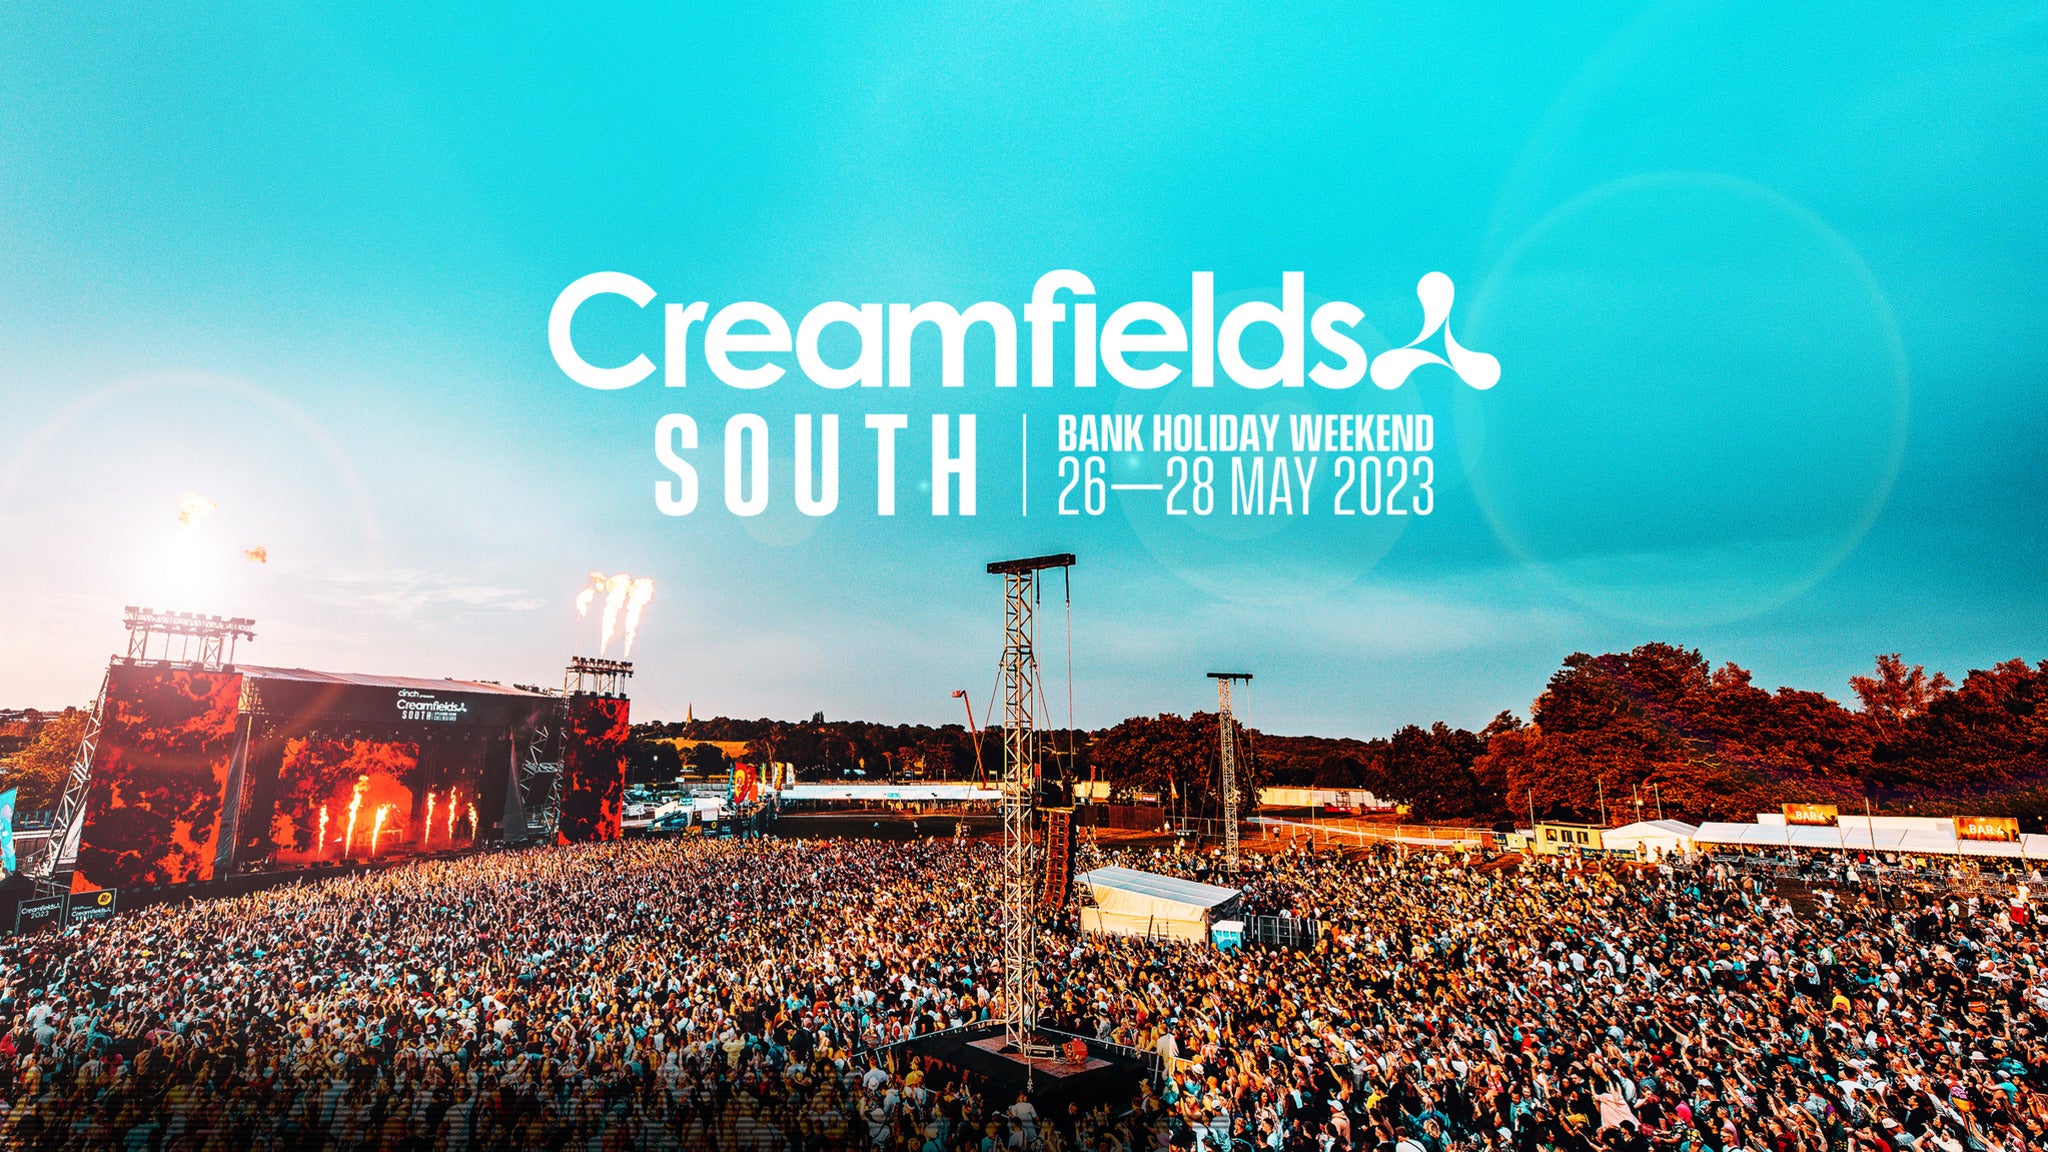 Creamfields South 2023 - Sunday Day - Deposit Event Title Pic